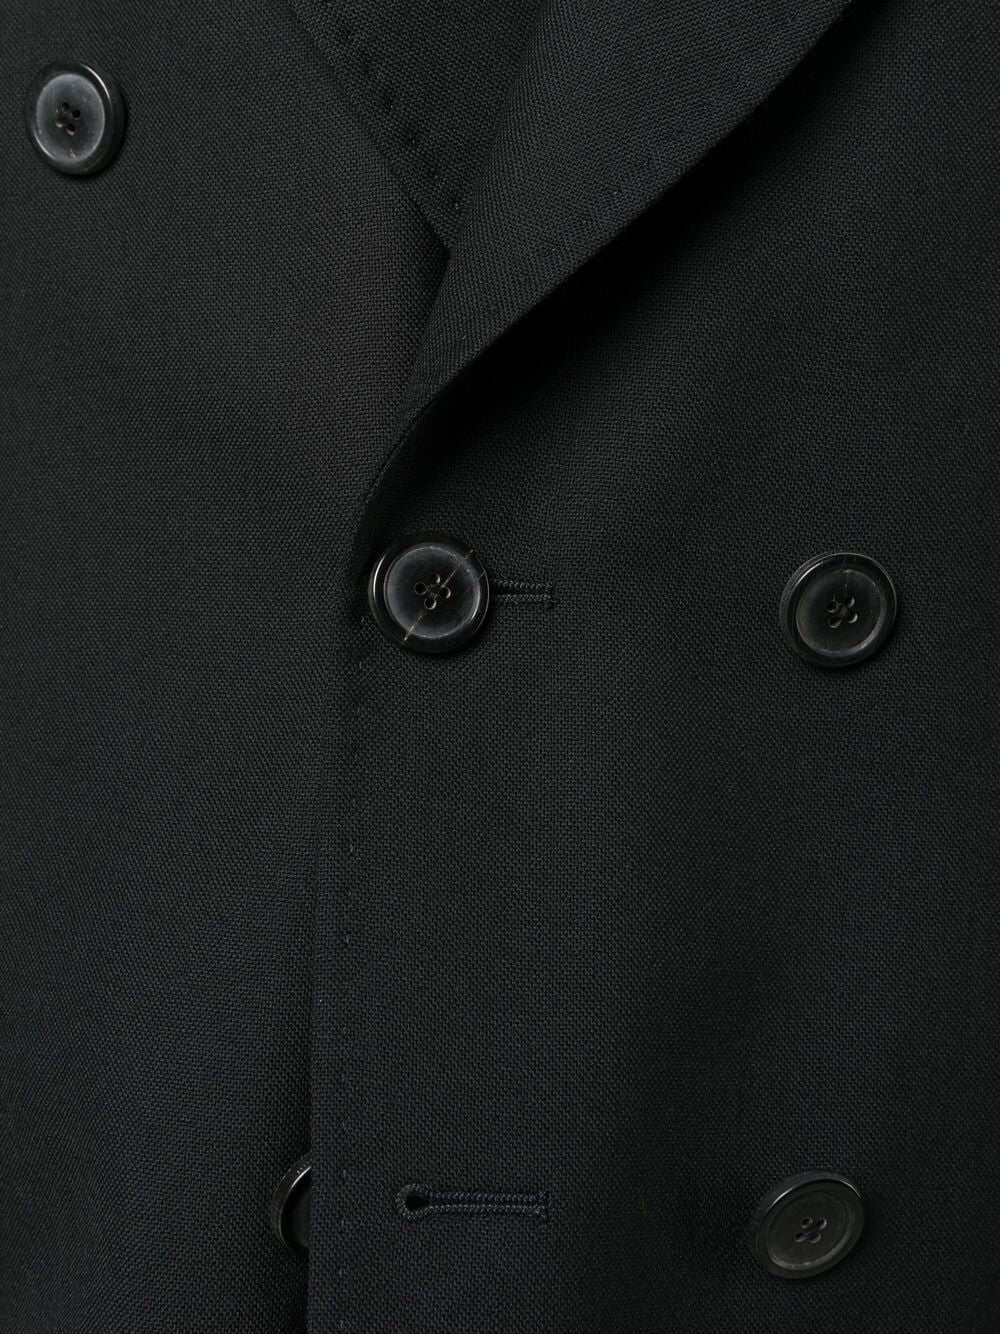 OUR LEGACY-UNCONSTRUCTED DOUBLE BREASTED BLAZER-M4200DBBP BLACK PANAMA WOOL